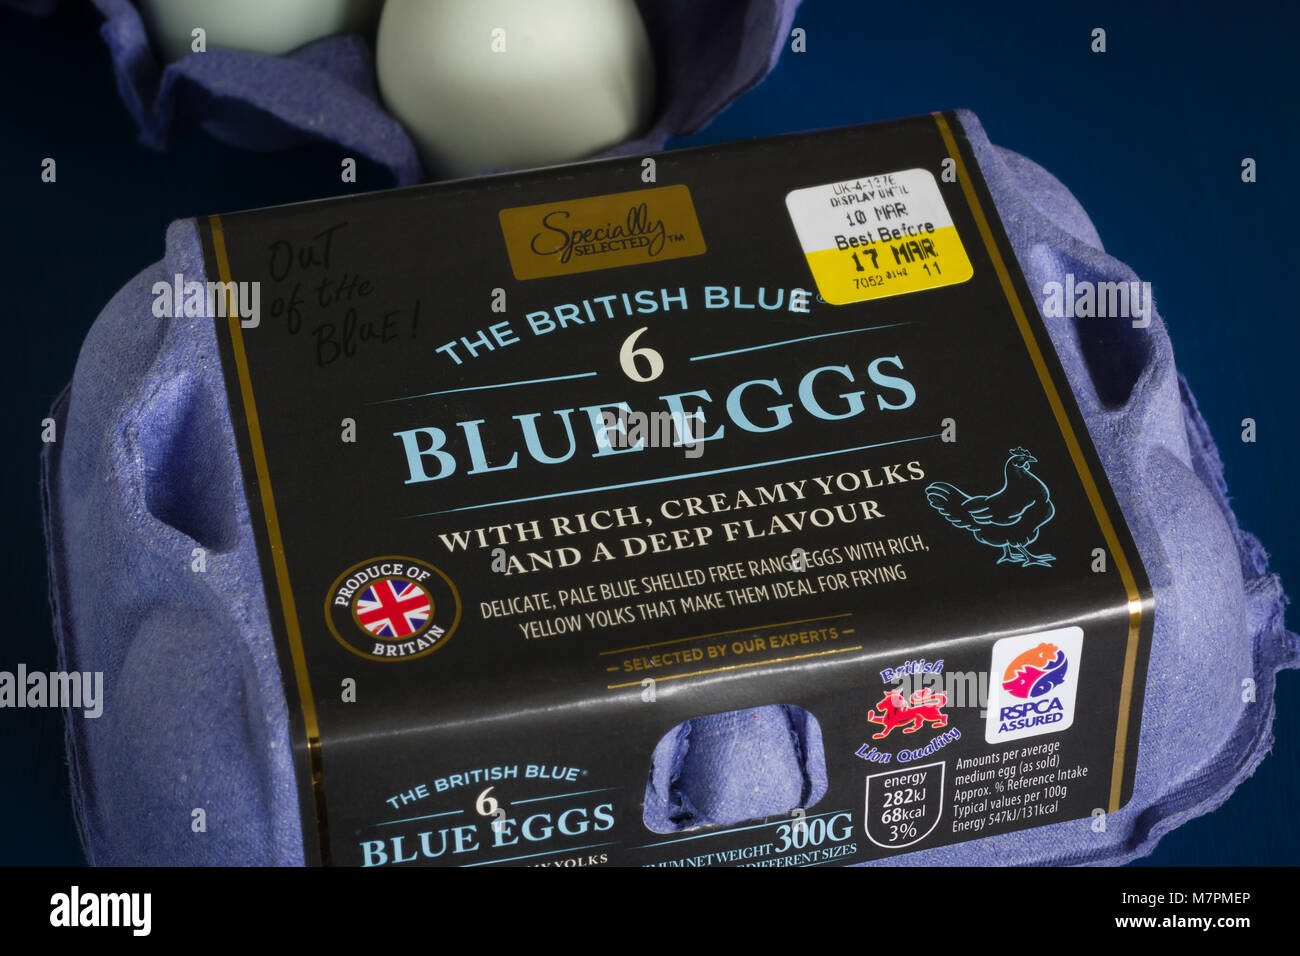 The British Blue hens eggs stocked under the Aldi Specially Selected brand developed and produced in Lincolnshire by LJ Fairburn and Son Stock Photo